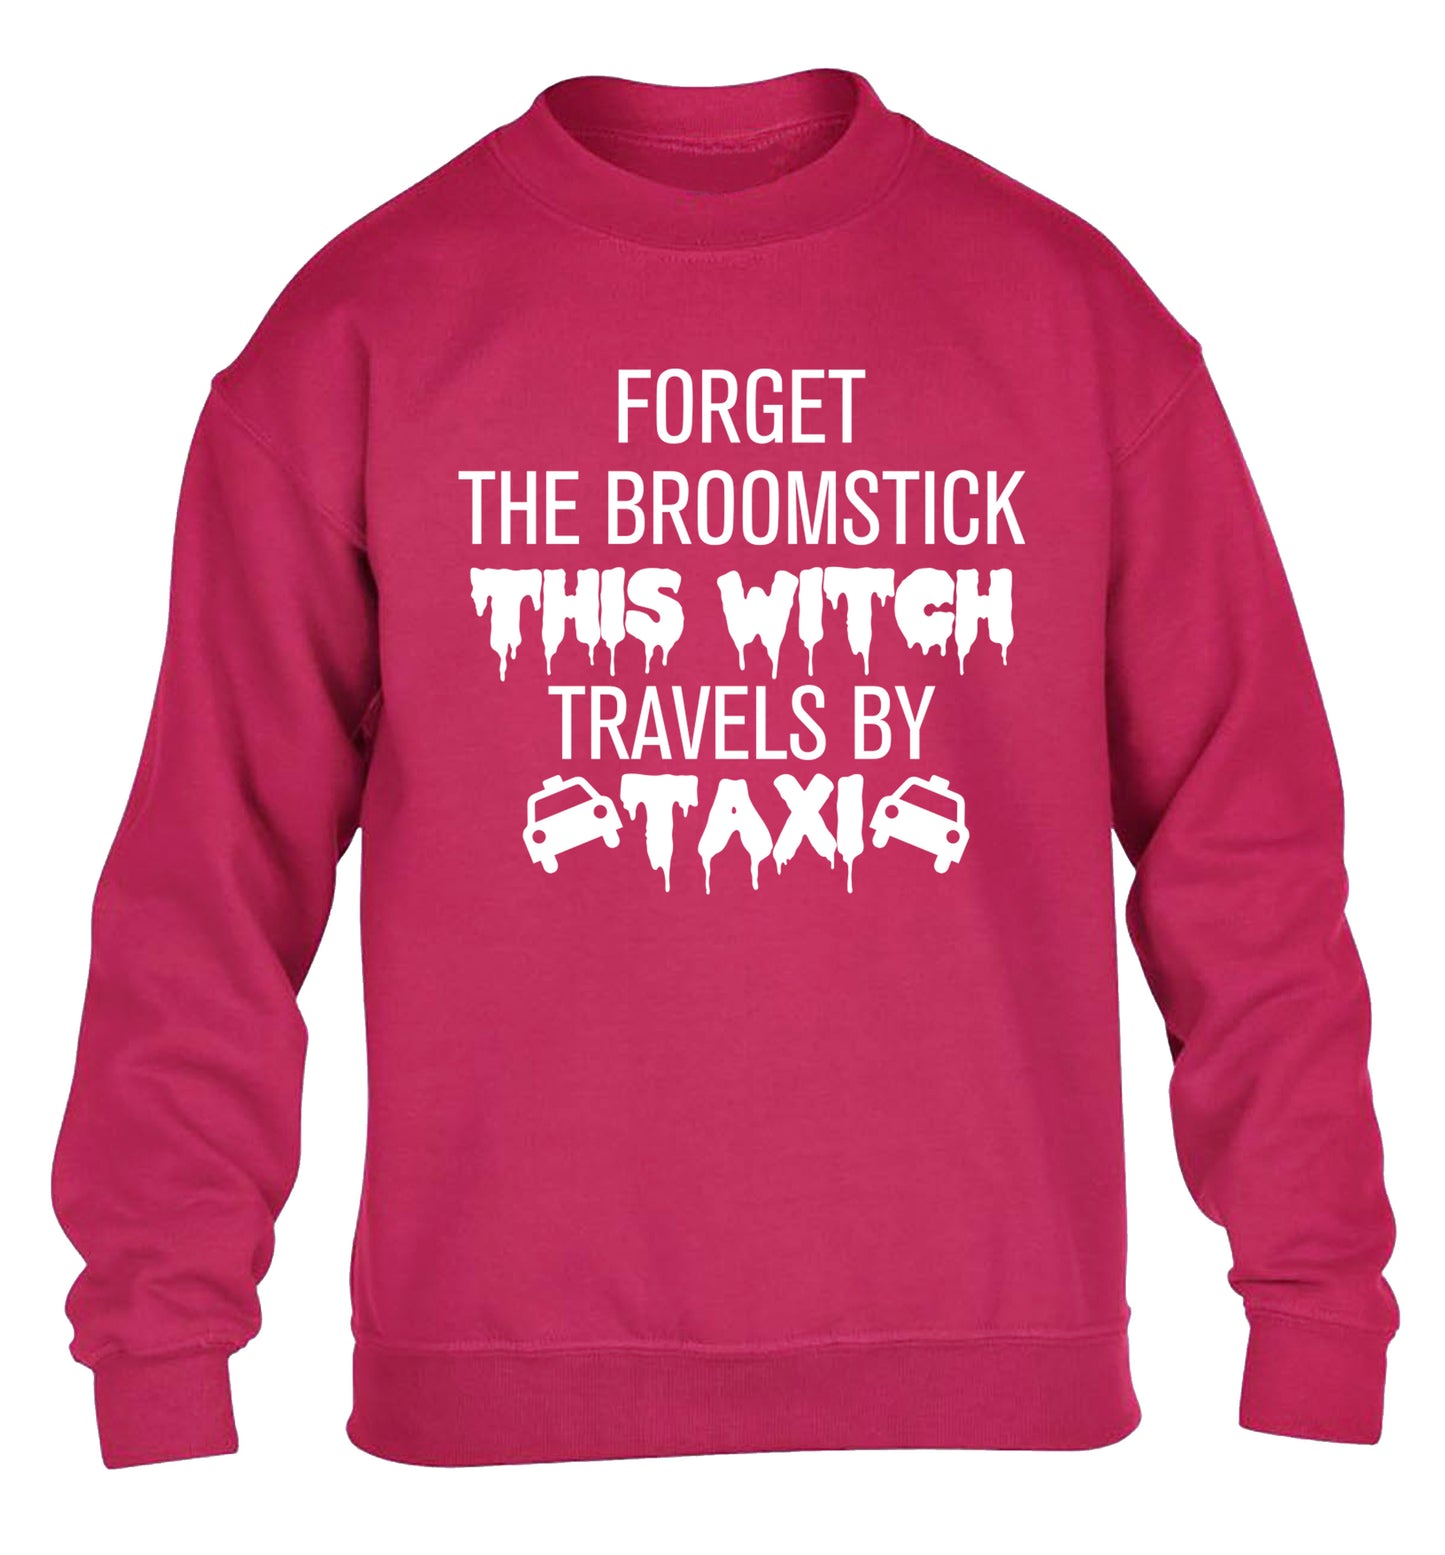 Forget the broomstick this witch travels by taxi children's pink sweater 12-14 Years